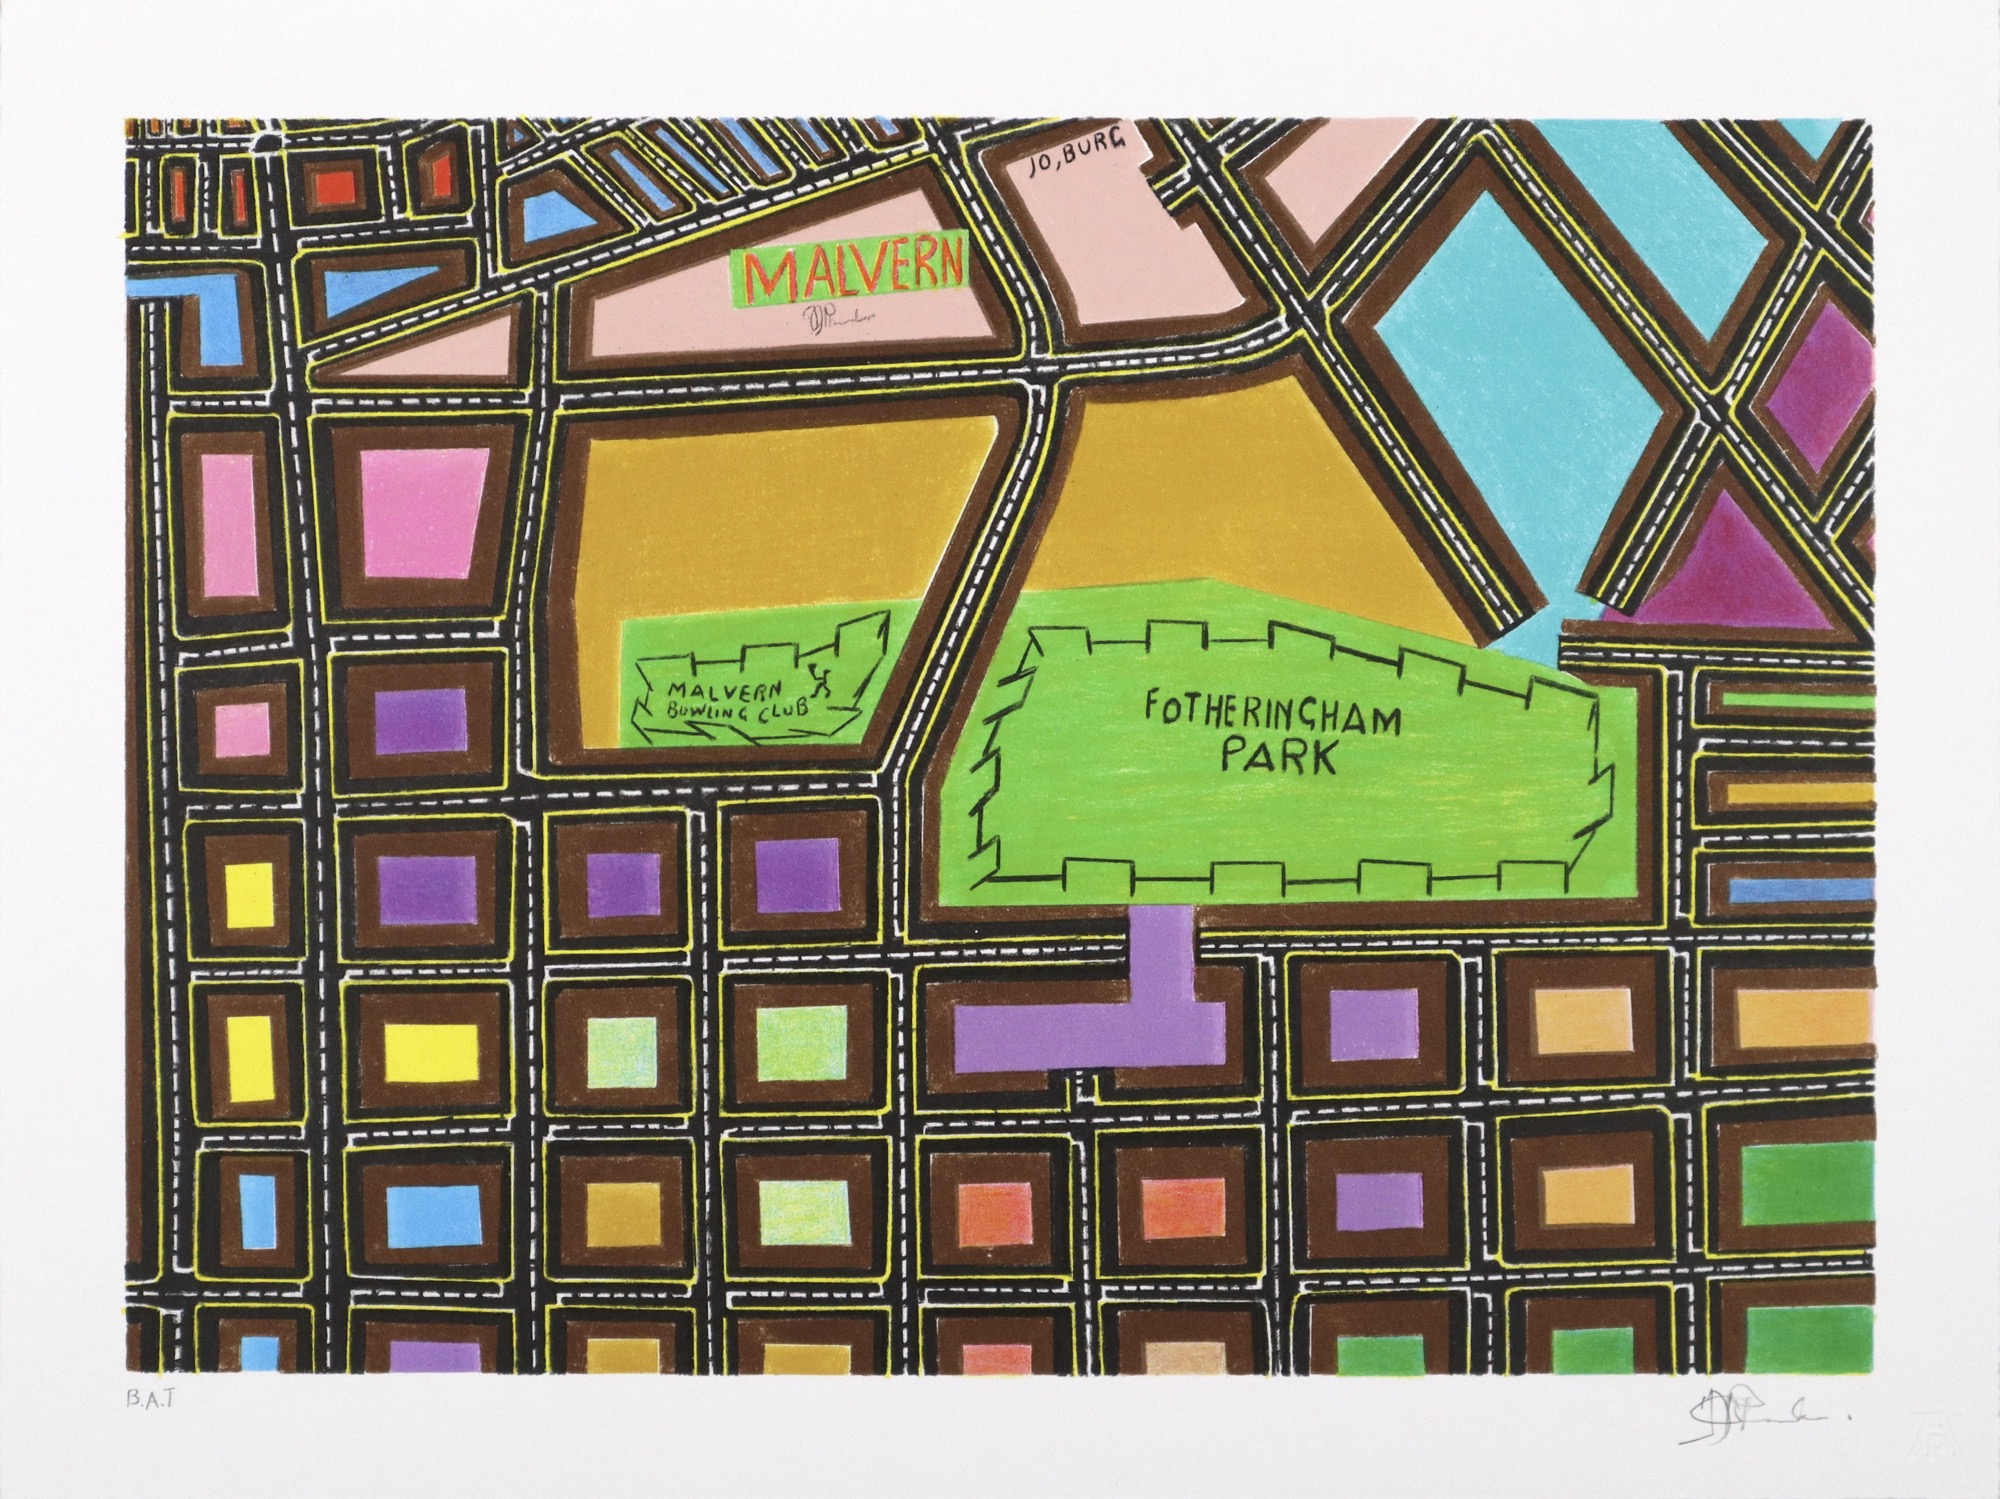 brightly coloured map of a section of Johannesburg by artist John Phalane